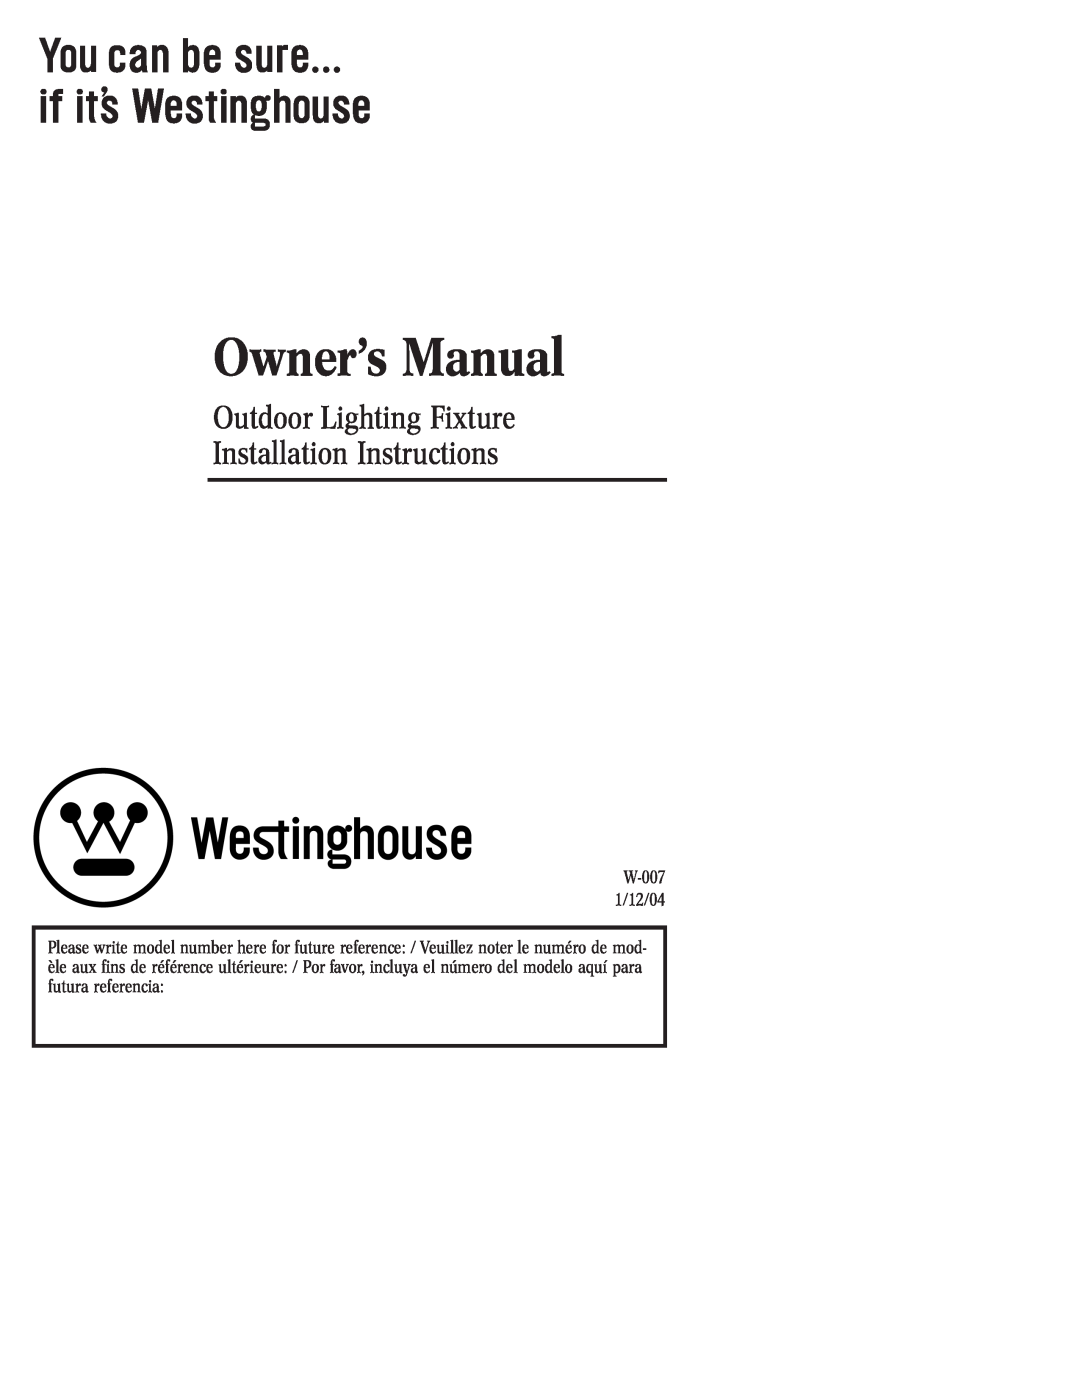 Westinghouse W-007 owner manual Outdoor Lighting Fixture, Installation Instructions 